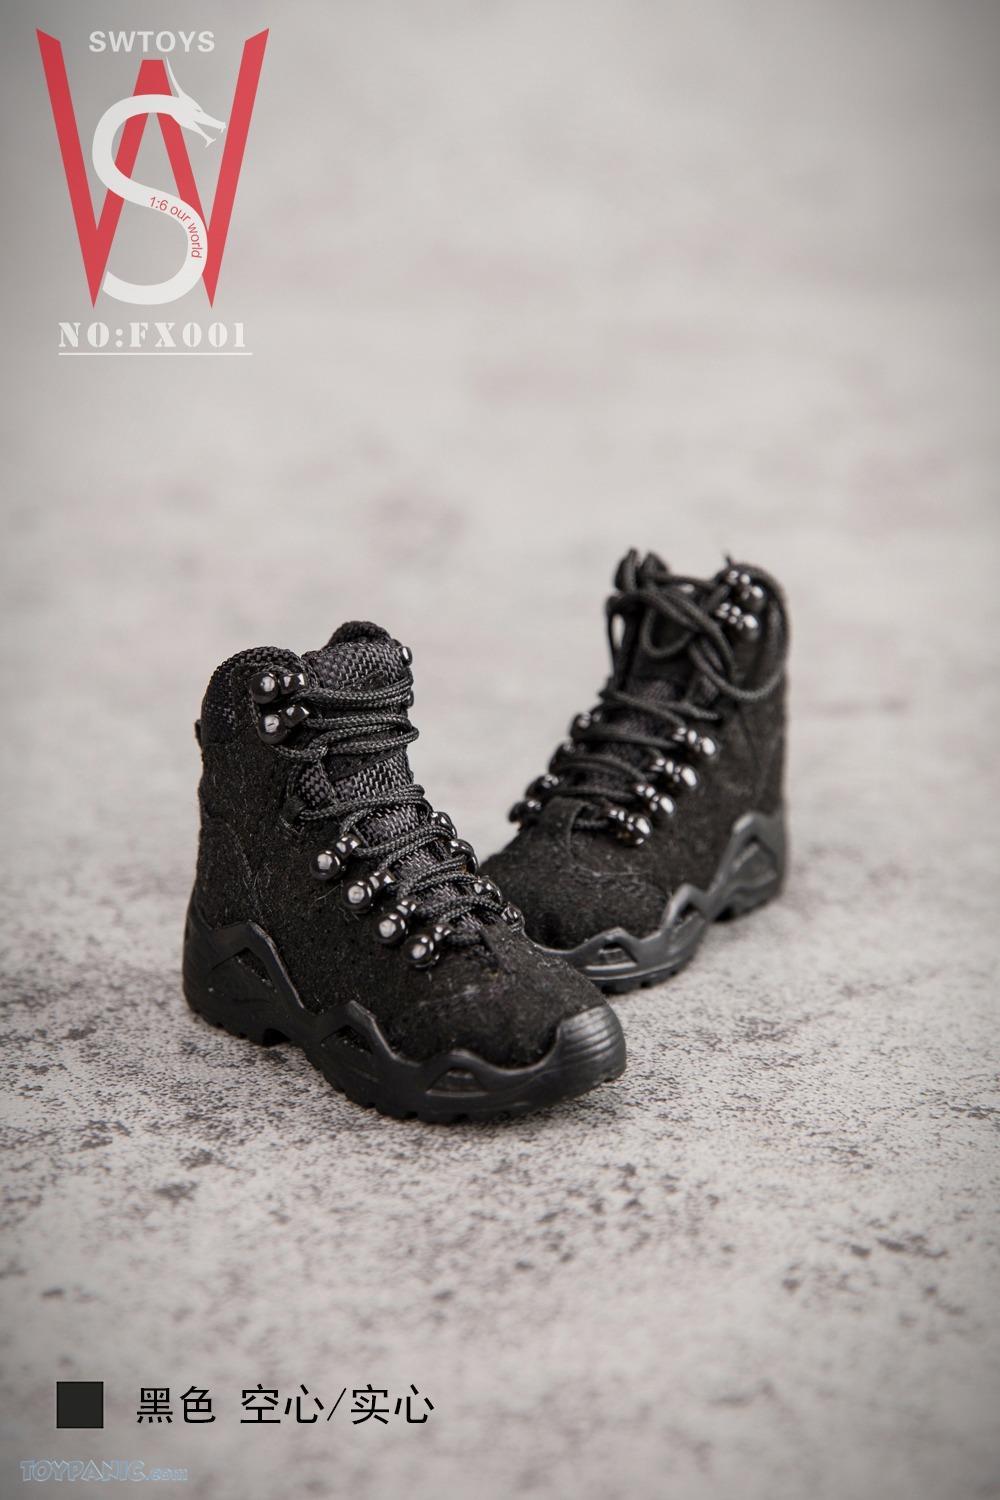 NEW PRODUCT: SWToys: Men's Tactical Military Boots (Hollow) (4 colors) 28820213